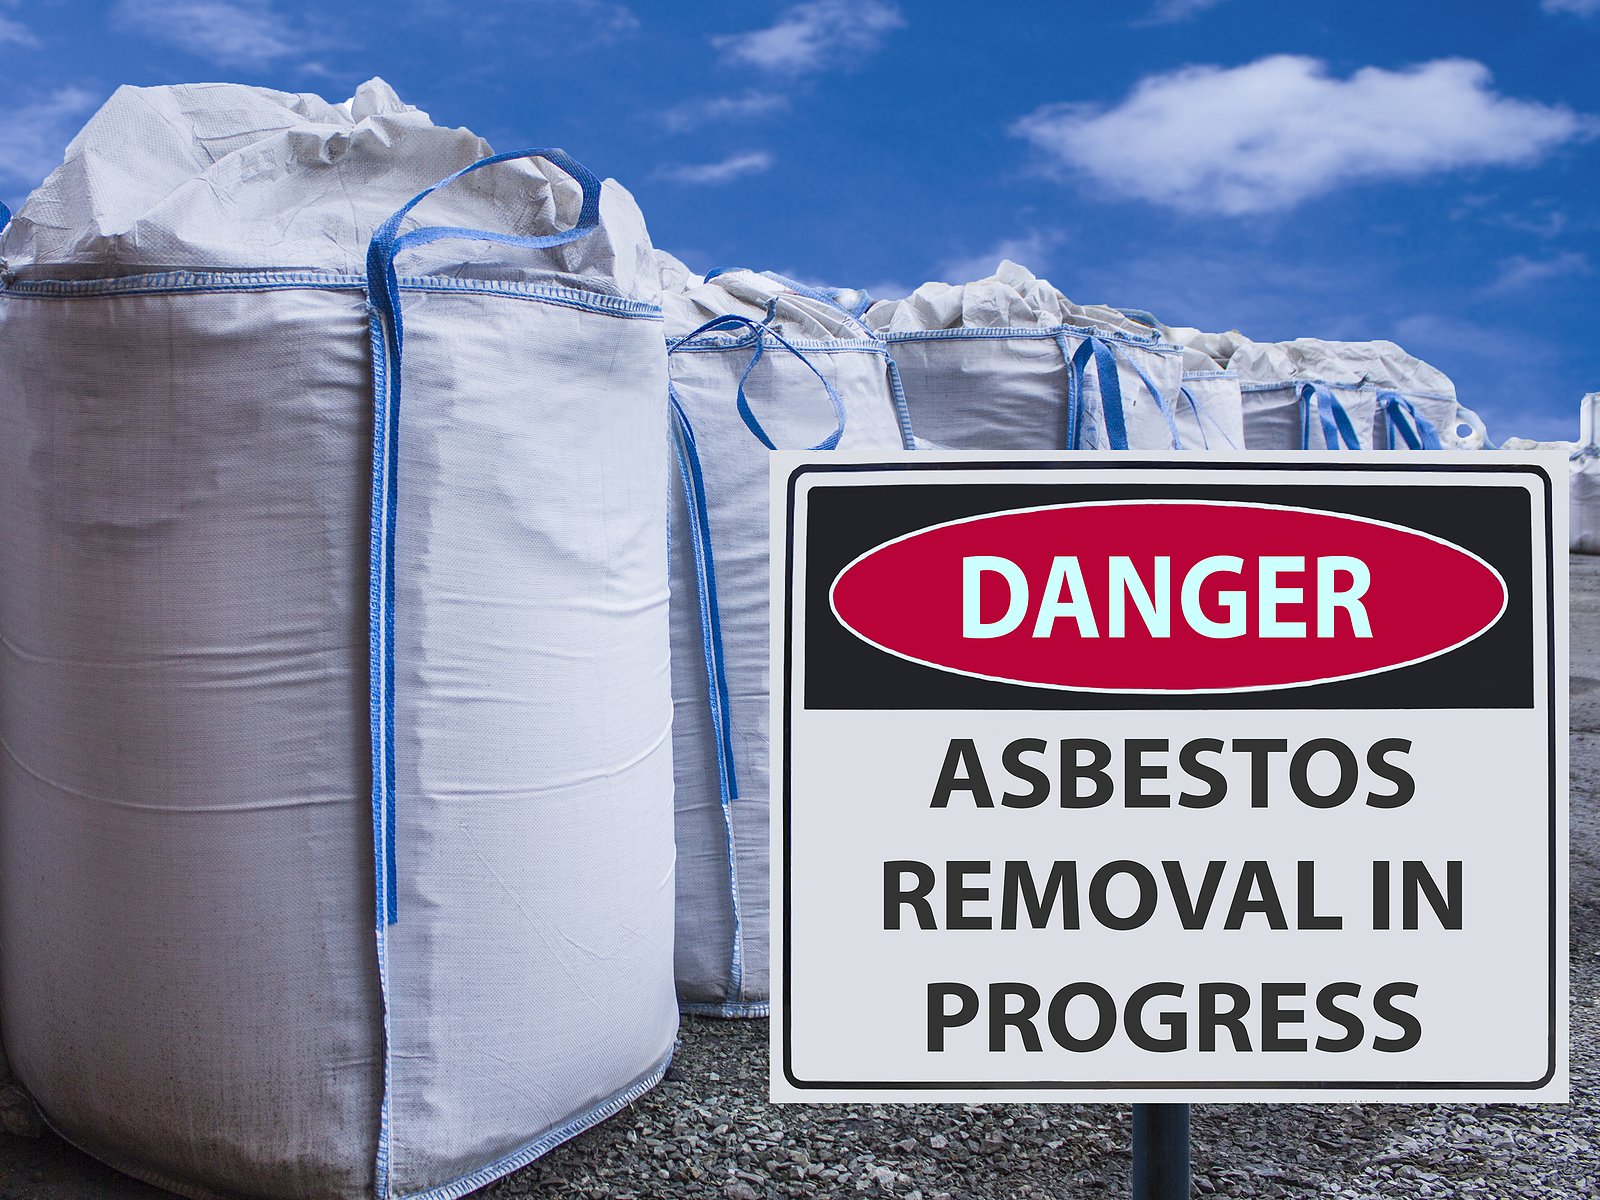 Buried asbestos may be an exposure risk